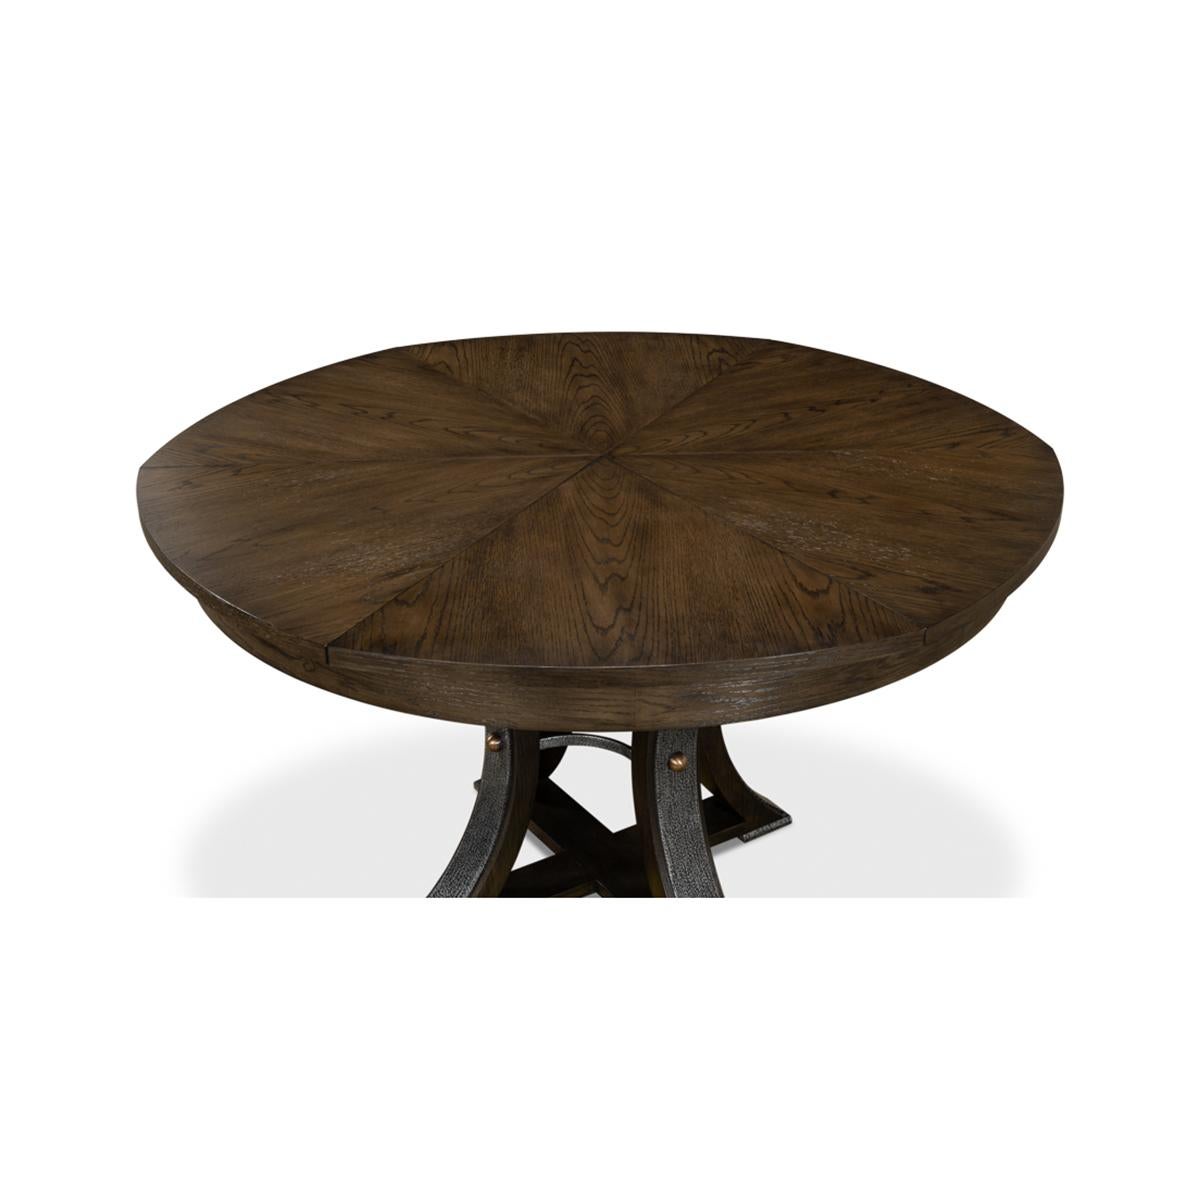 Modern Industrial Dining Table - 70